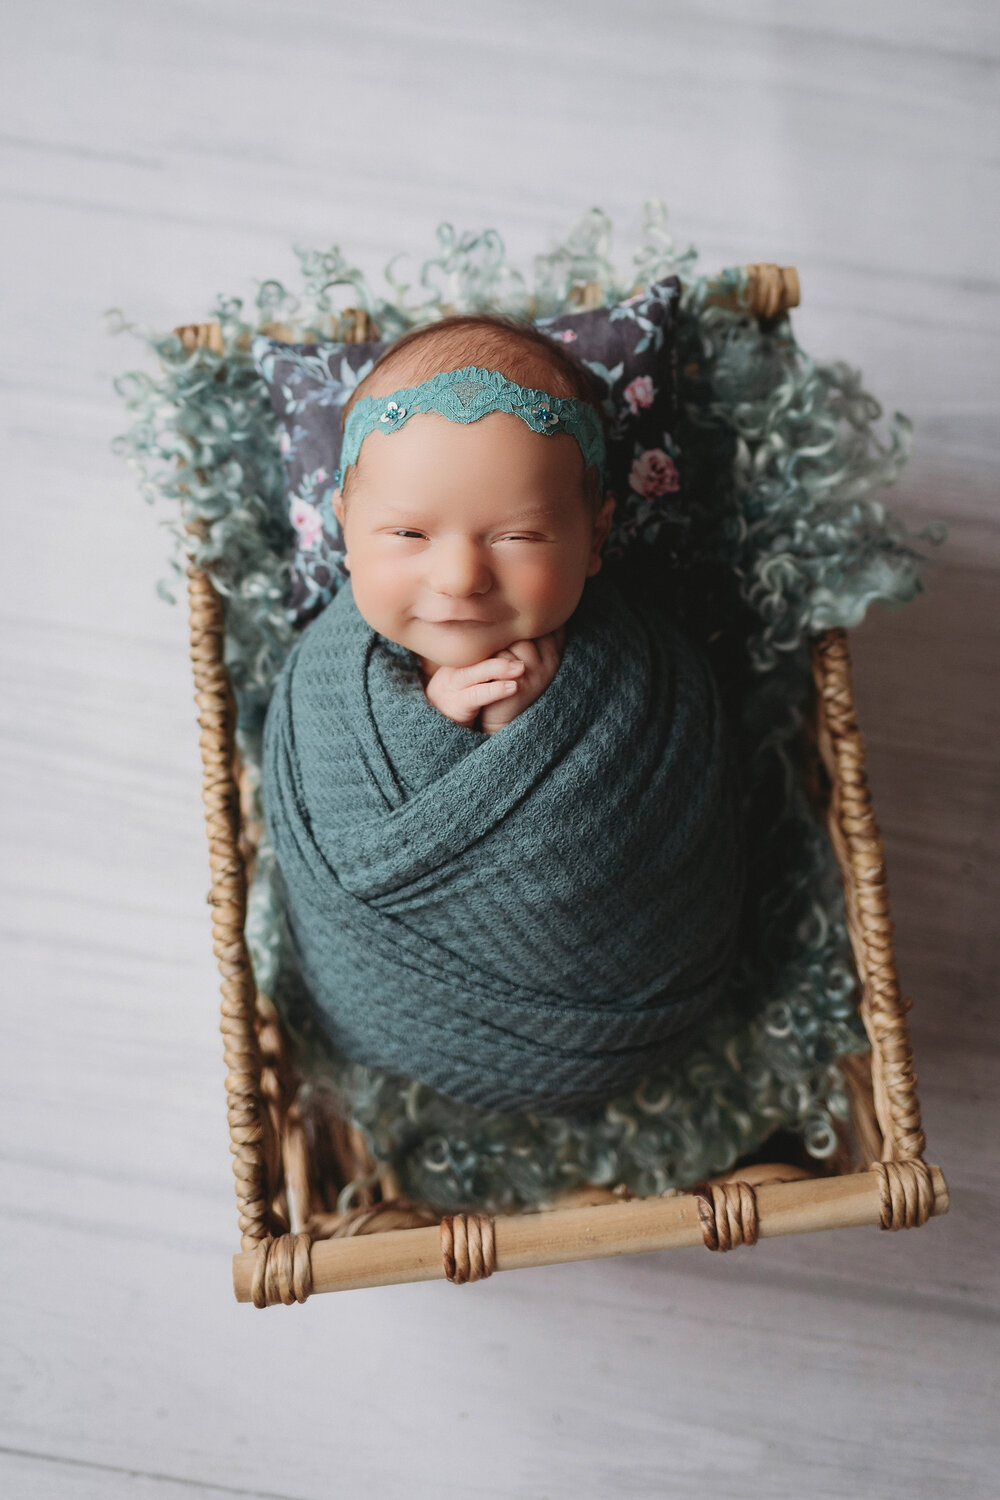 potato pose in teal with baby girl for newborn photography session in minneapolis mn